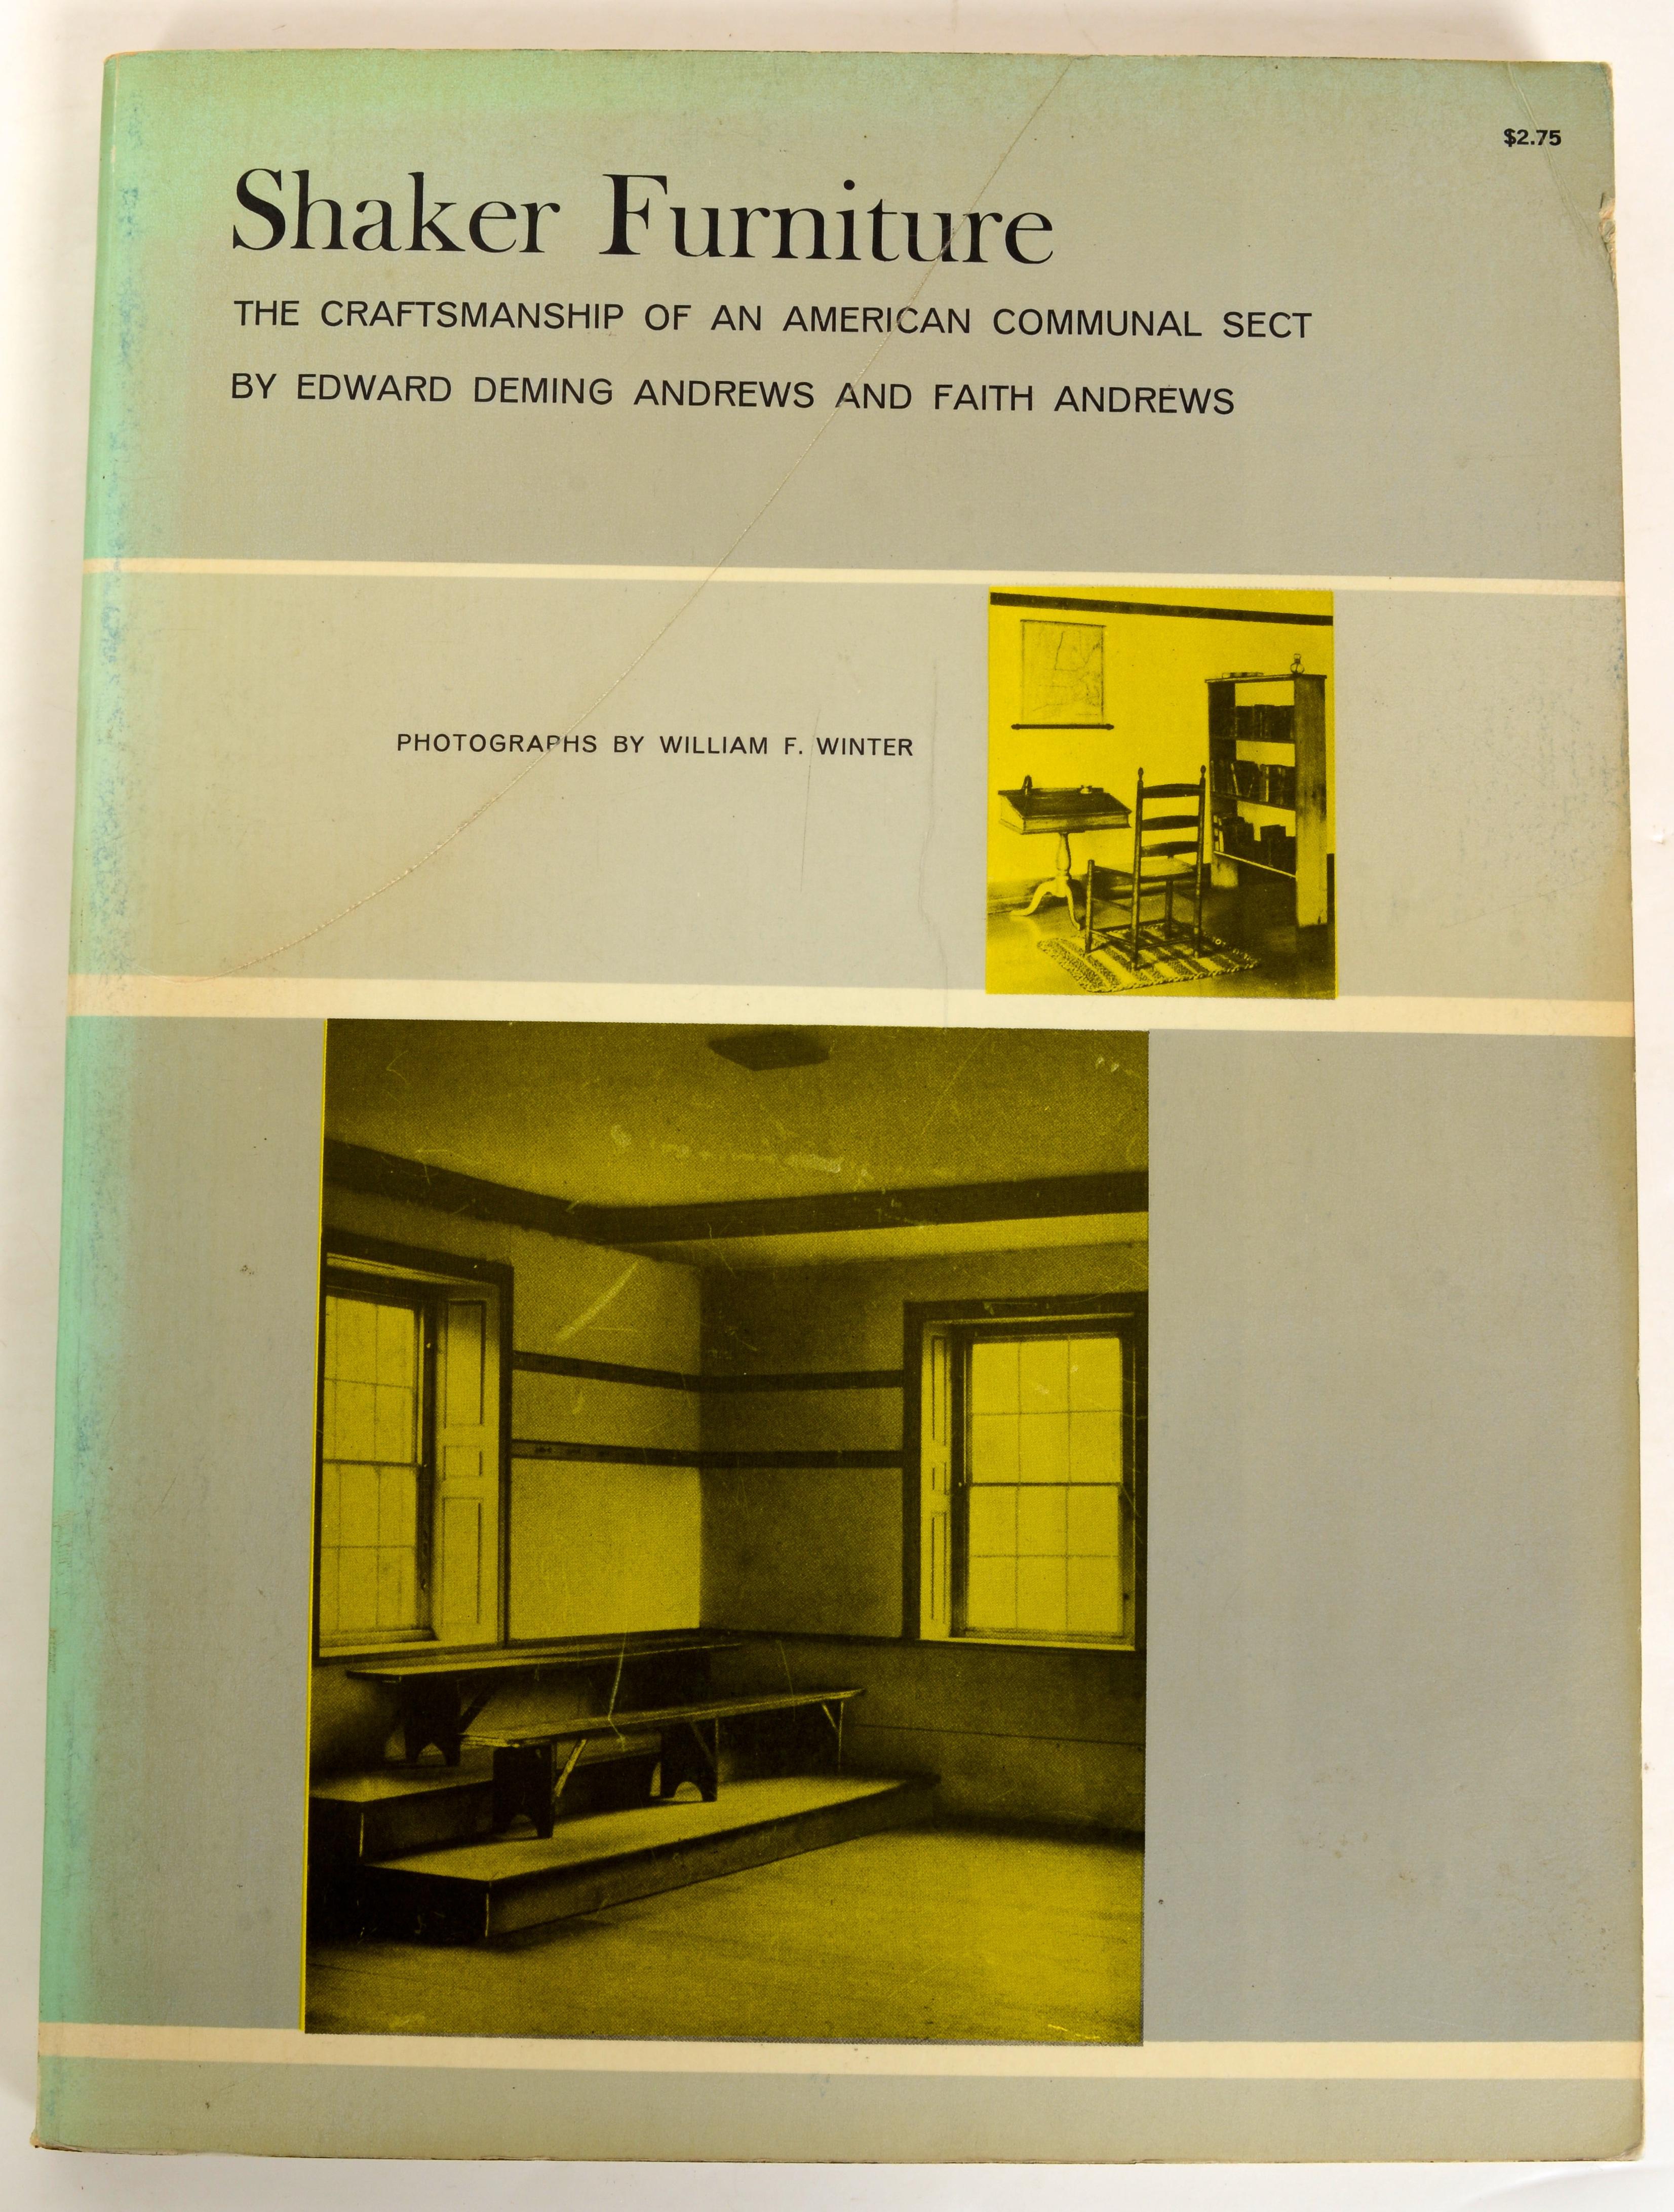 Set of Three Important Key Books on Shaker Furniture and Accessories:
1. By Shaker Hands by June Sprigg, Softcover Published by Knopf, 1975. New York. 
2. Shaker Furniture; The Craftsmanship of an American Communal Sect
by Edward Deming Andrews and